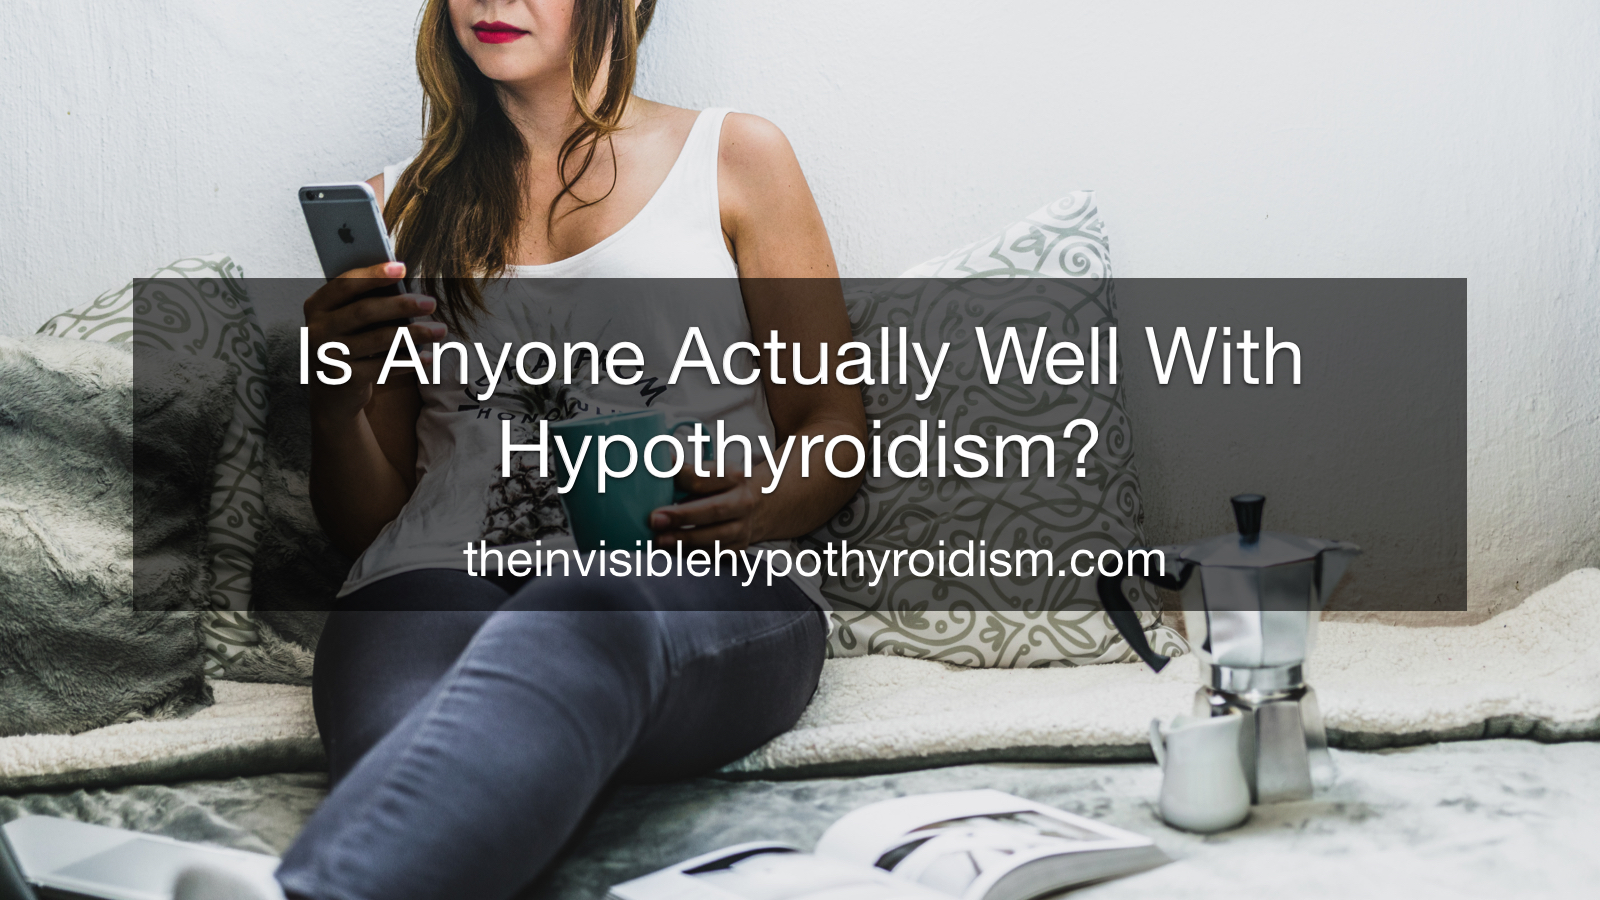 Is Anyone Actually Well With Hypothyroidism?